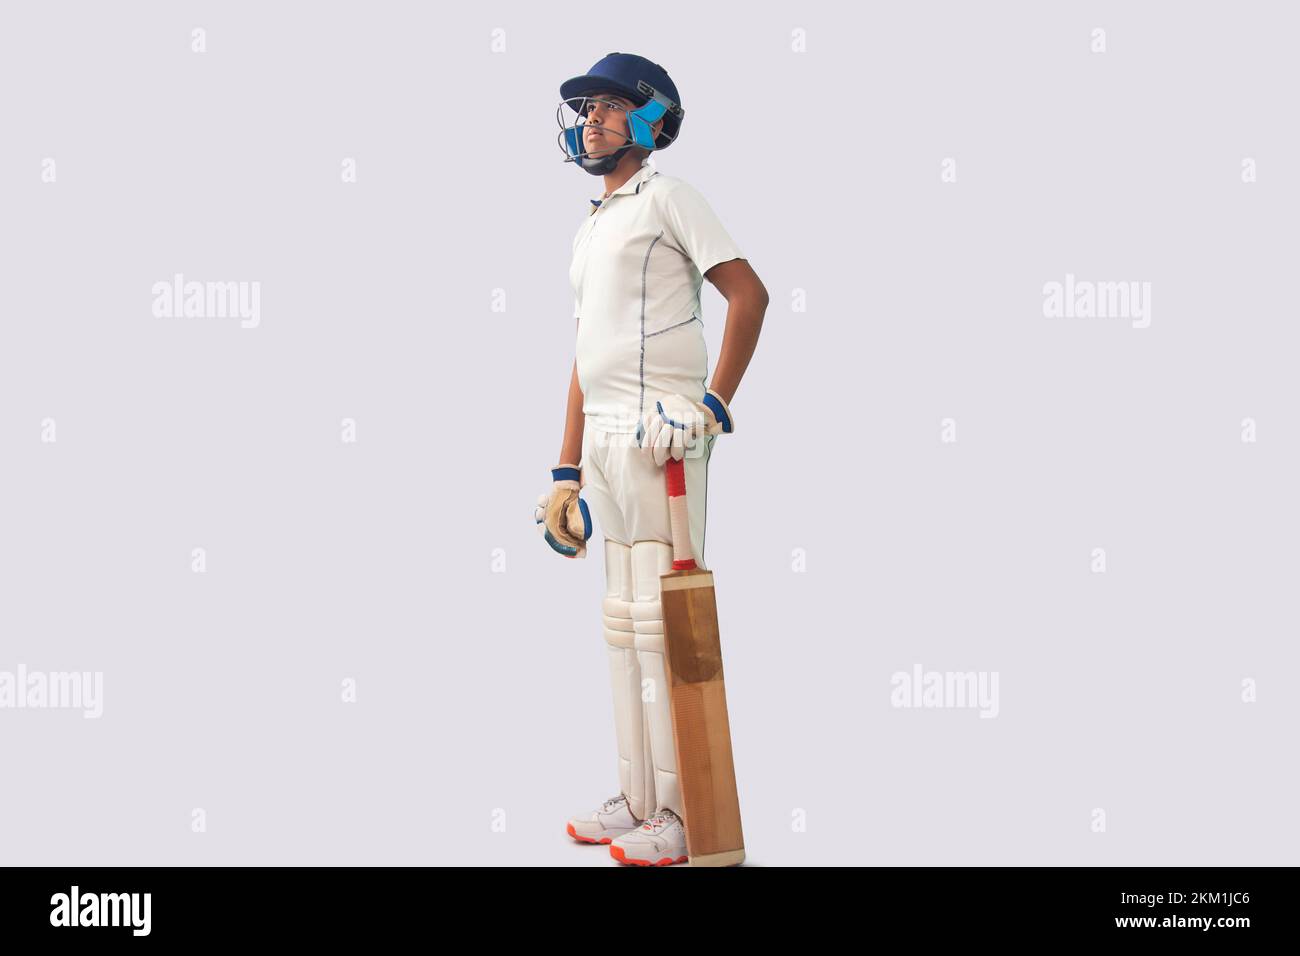 Side view of a boy in cricket uniform standing with bat looking elsewhere Stock Photo